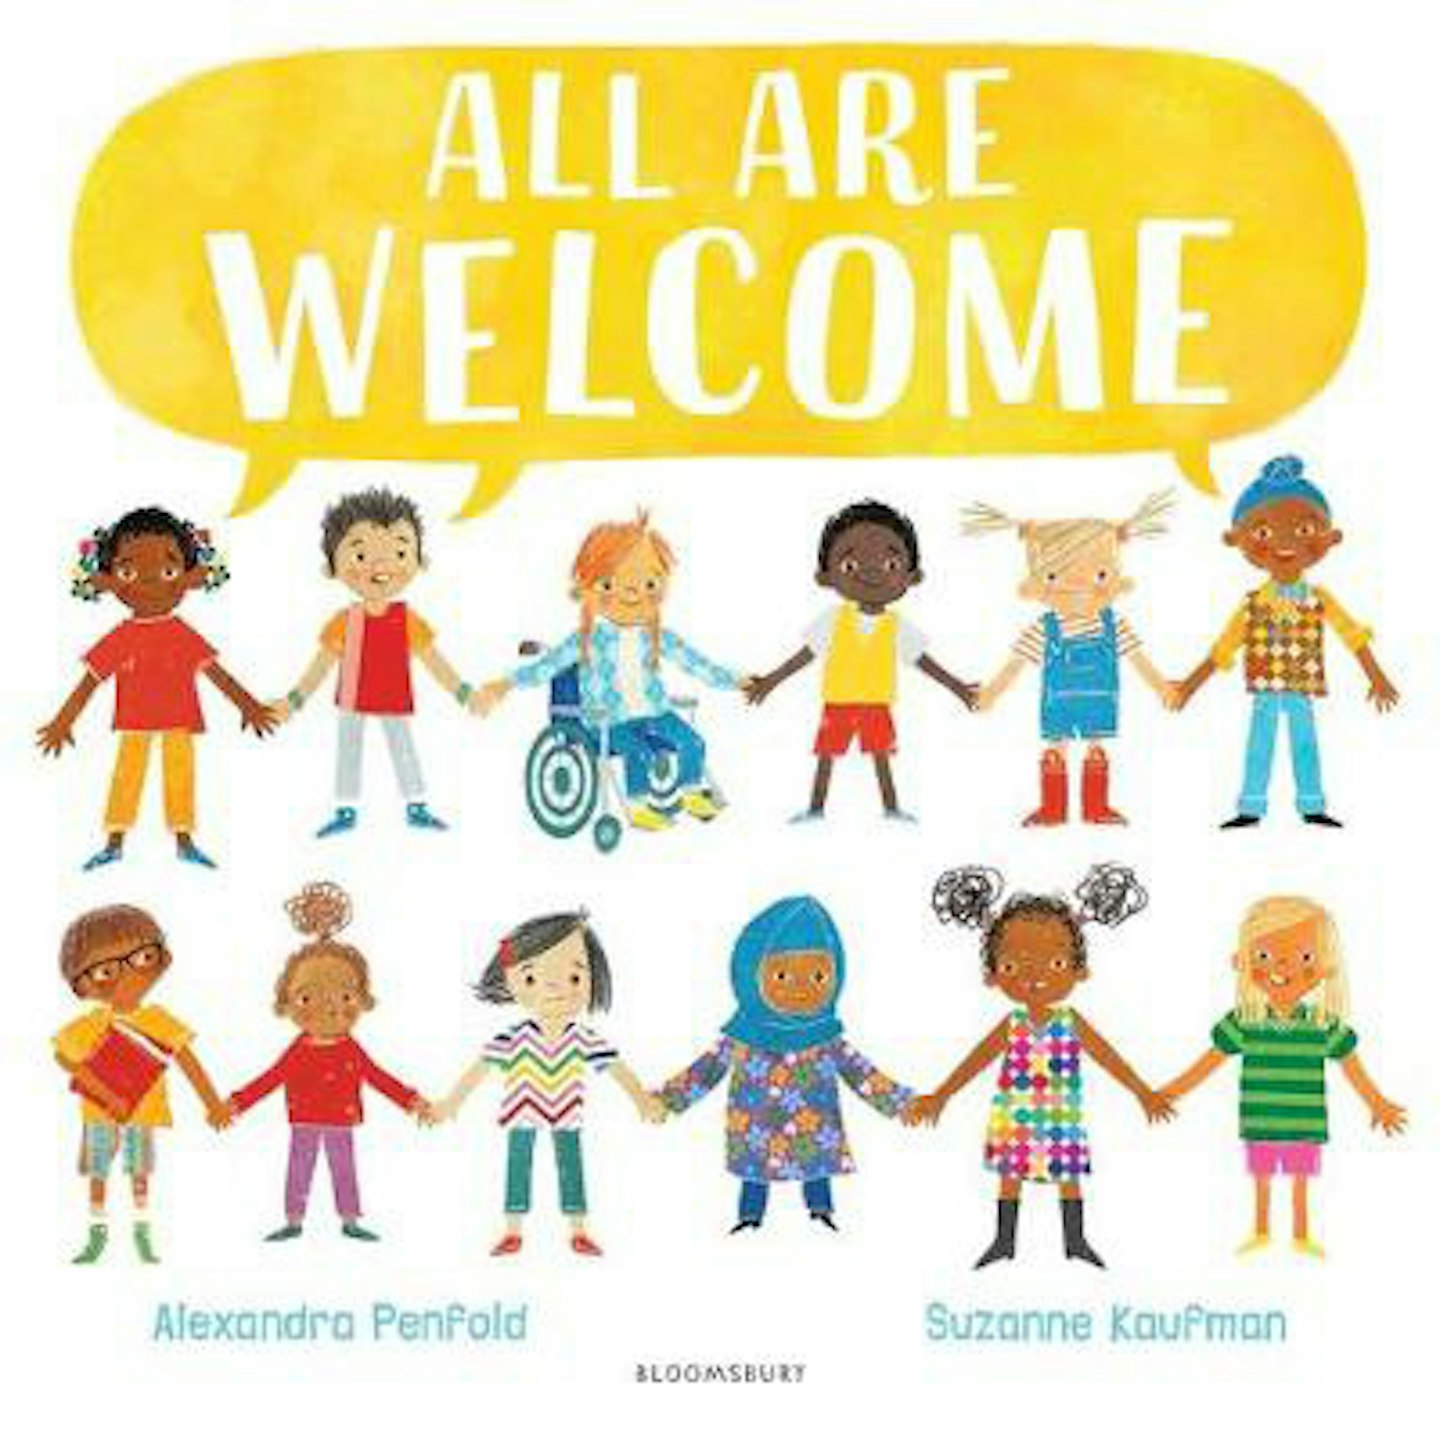 All Are Welcome by Alexandra Penfold 